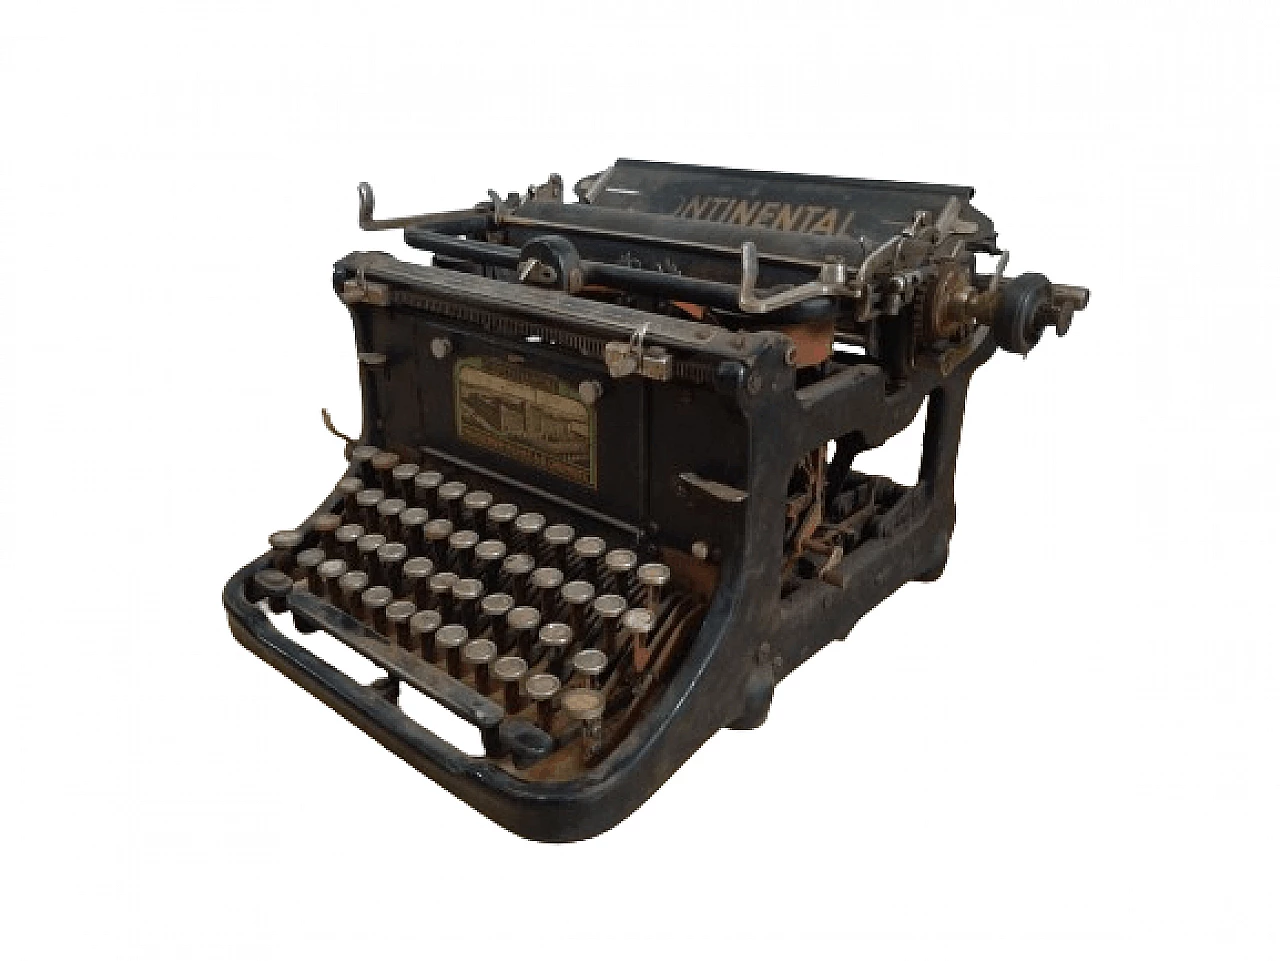 Continental typewriter, early 20th century 1